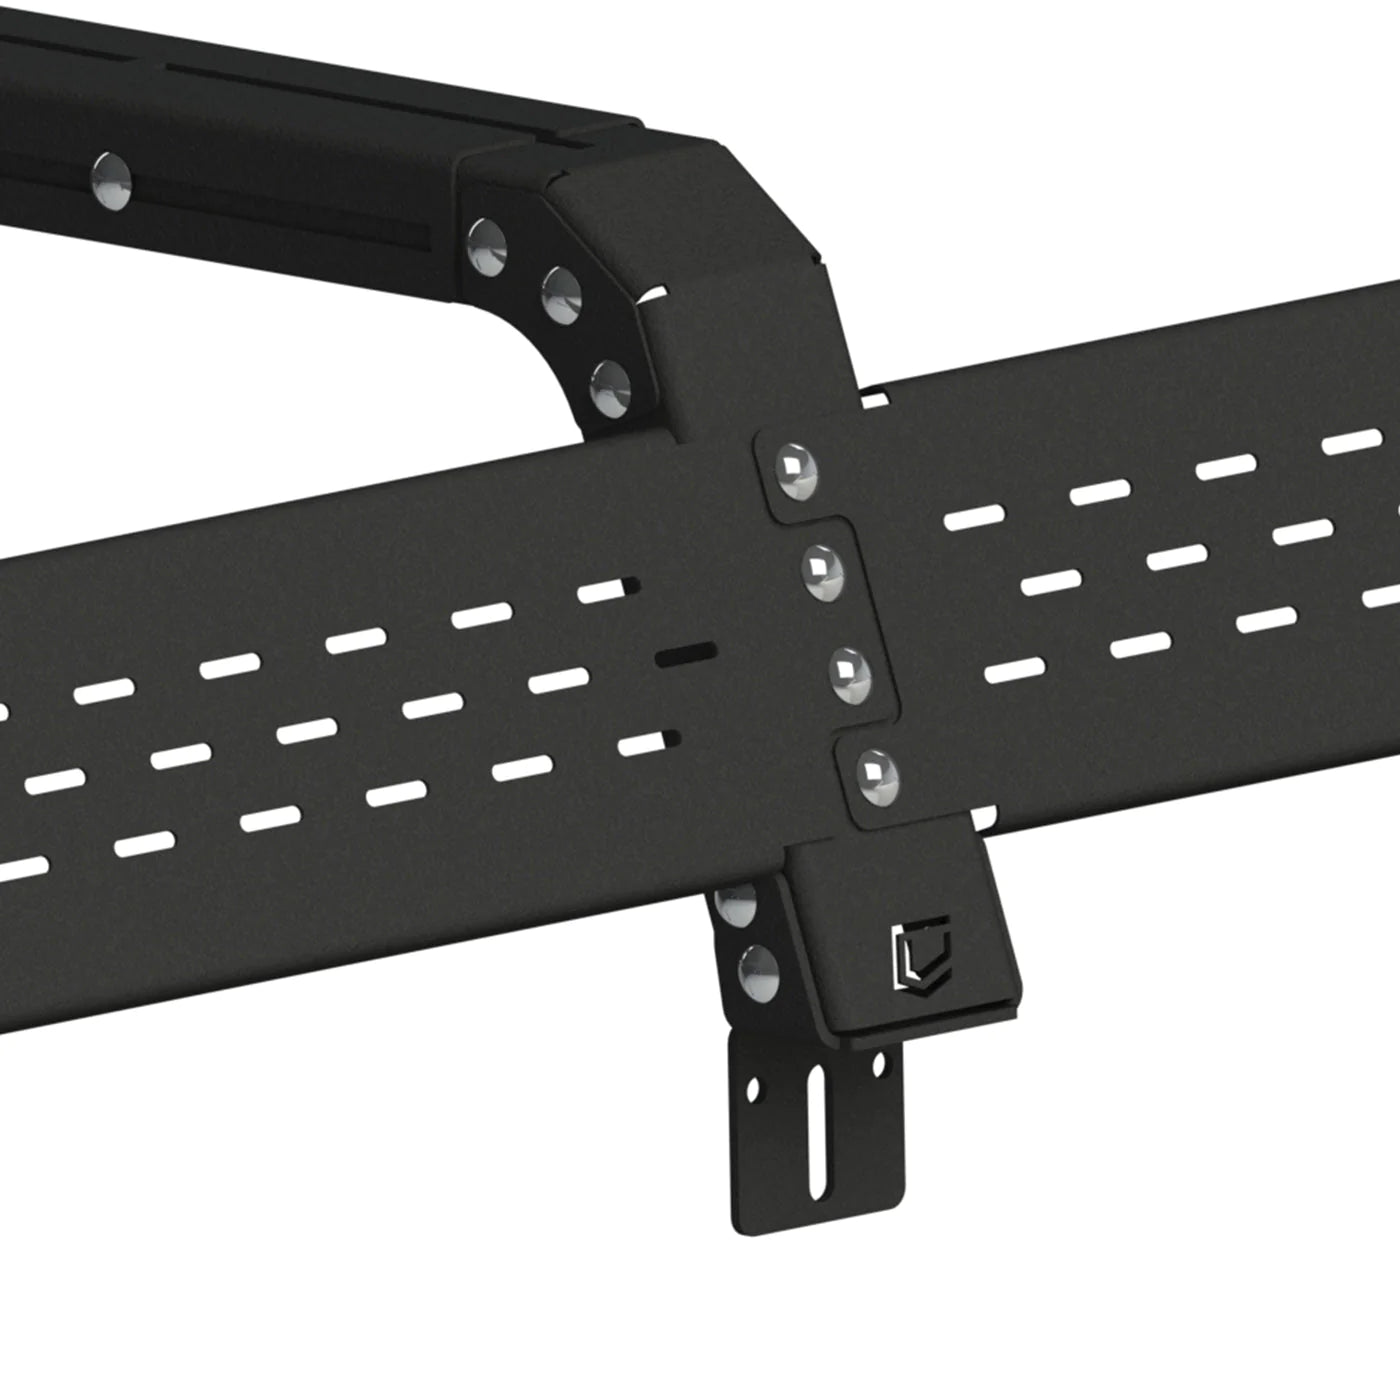 12" UNIVERSAL THORAX OVERLAND BED RACK SYSTEM (ANY TRUCK)